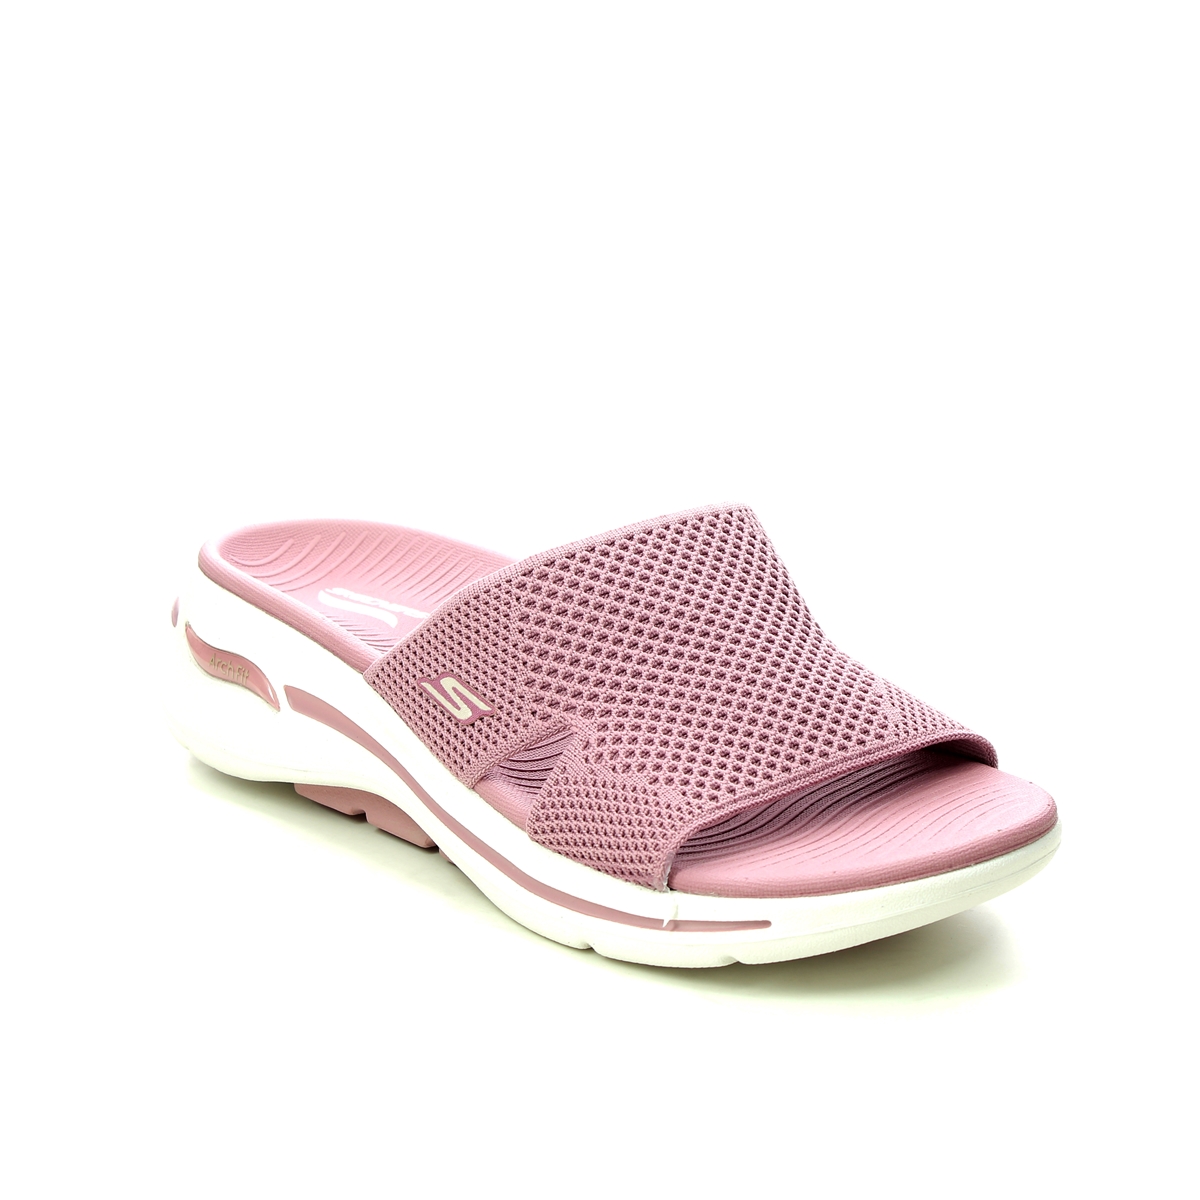 Skechers Arch Fit Worthy ROS ROSE Womens Slide Sandals 140224 in a Plain  in Size 7